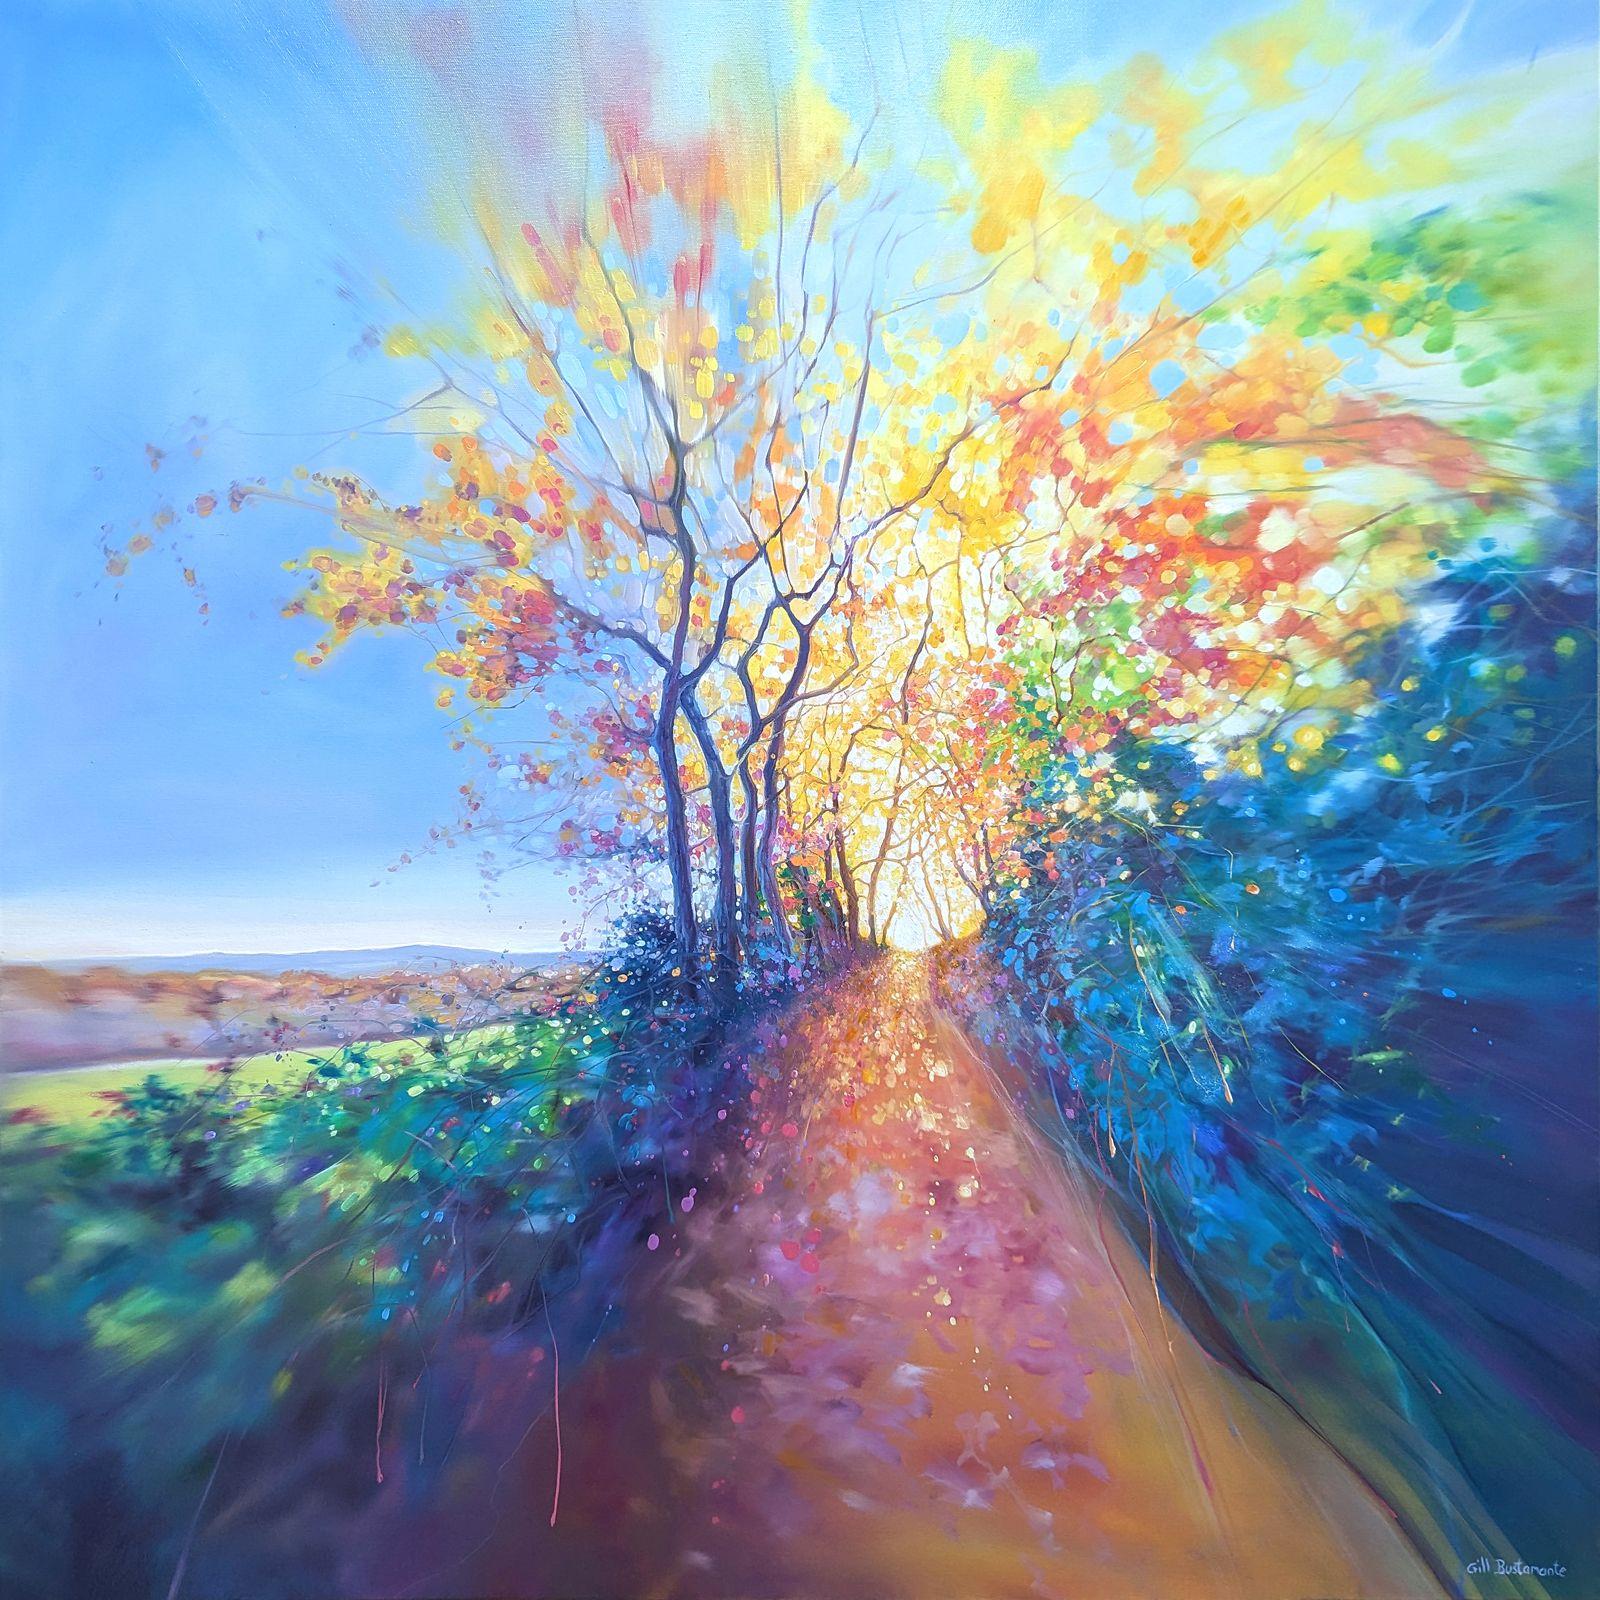 The Truth Calls is a large oil painting of an autumn path through English countryside and woodland with views across fields and hedgerow beside it. It is 40x40x1.5 inches. The painting is blurred at the edges which appears to pull the viewer onto